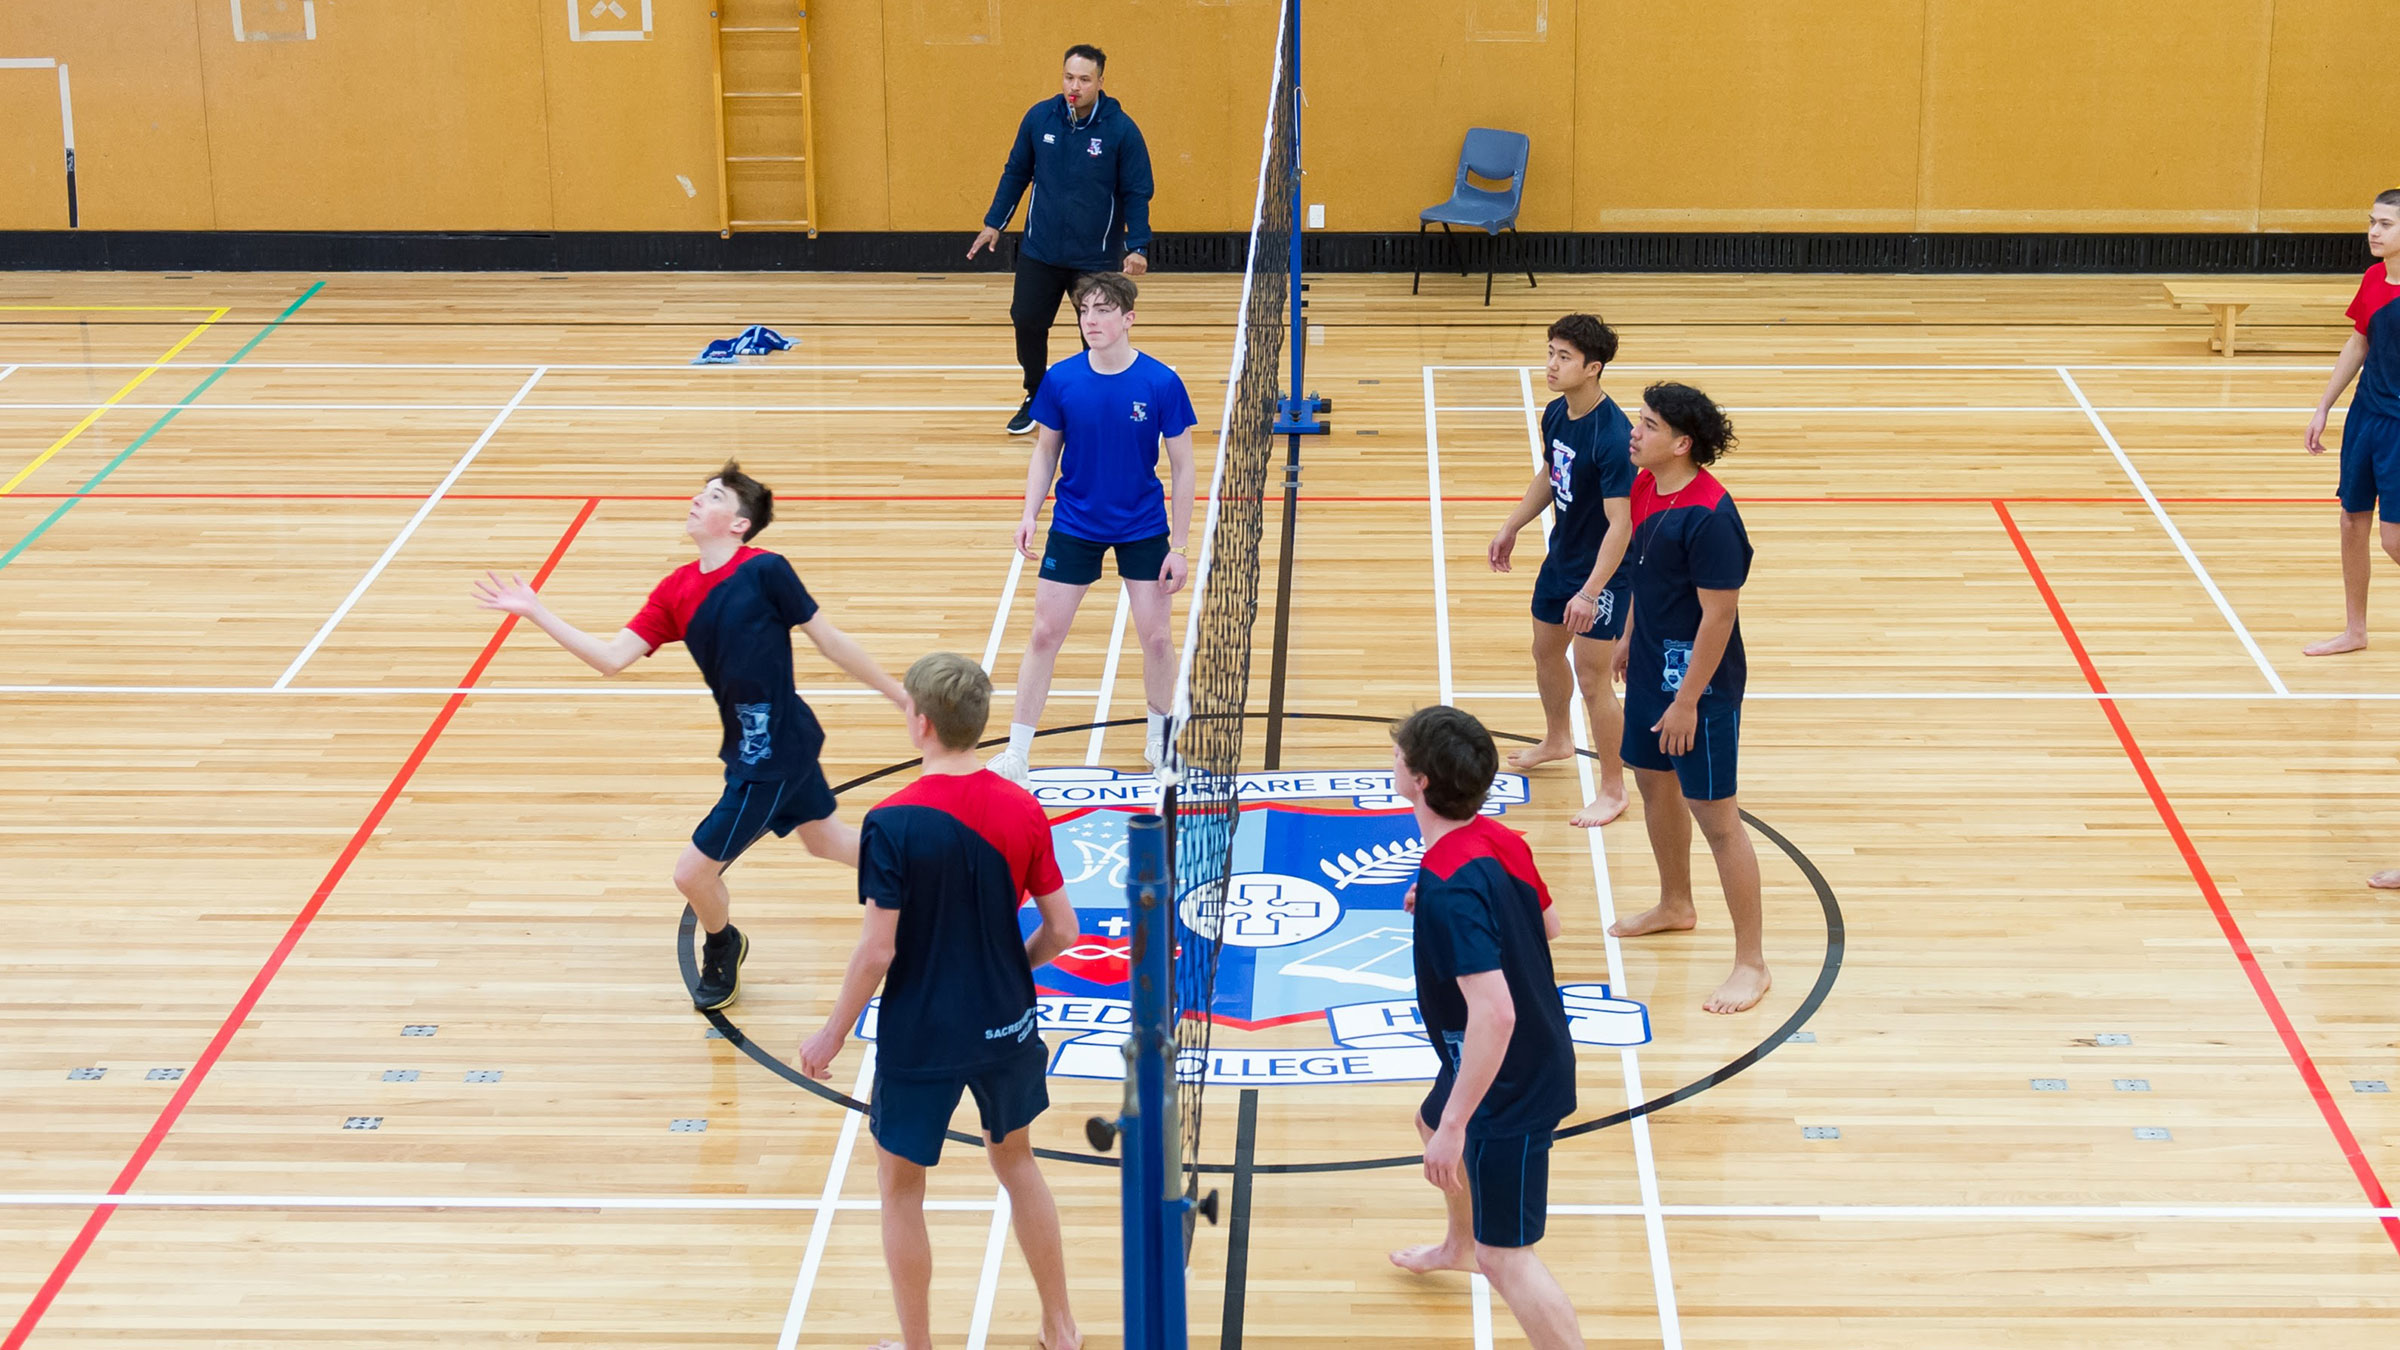 Secondary school students playing volleyball